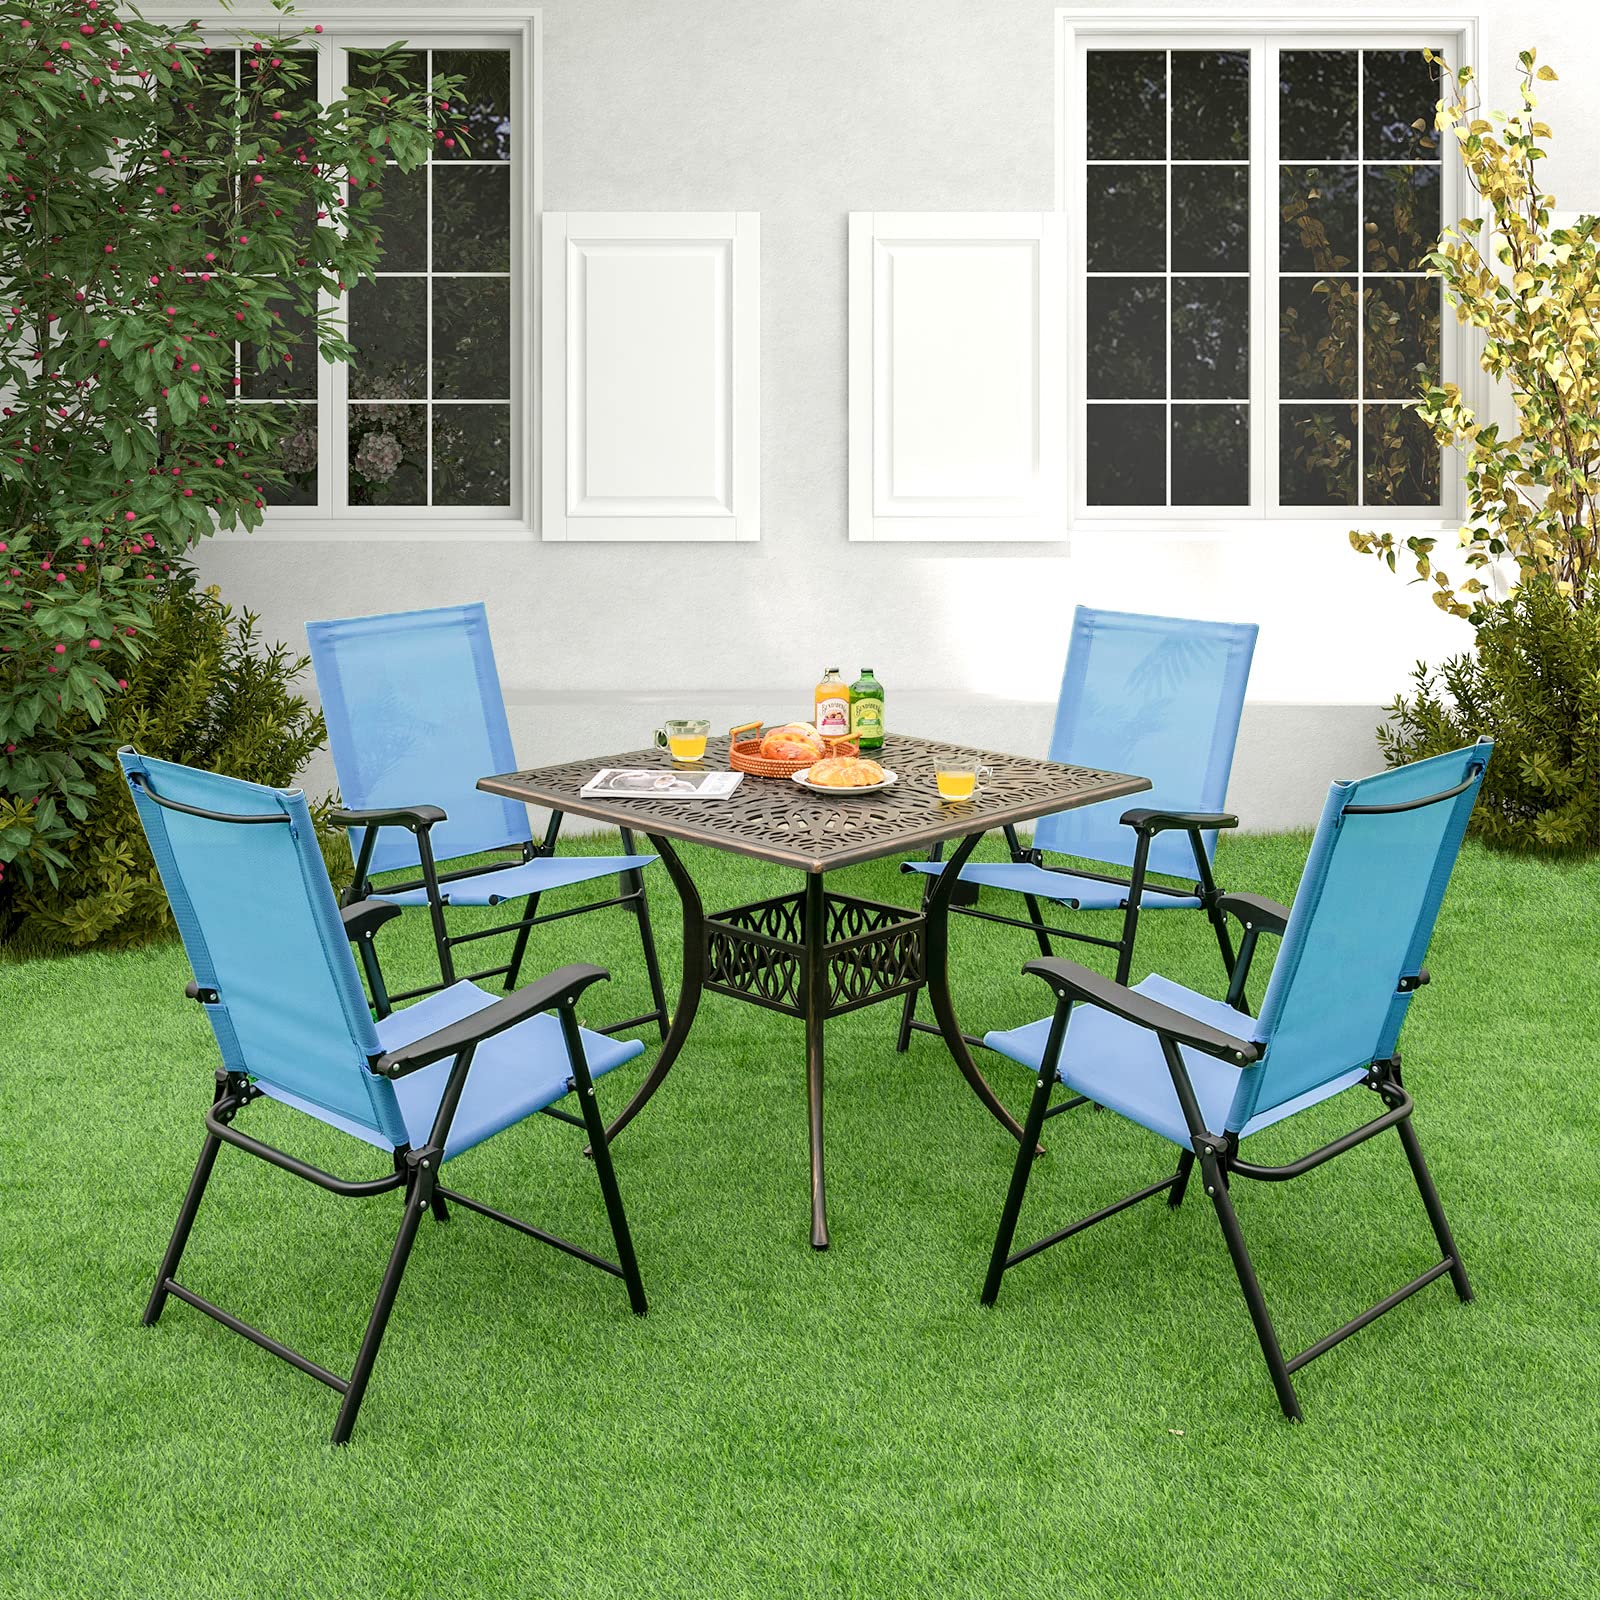 Tangkula Set of 2 Patio Folding Chairs, Portable Sling Back Chairs with Armrests and Metal Frame